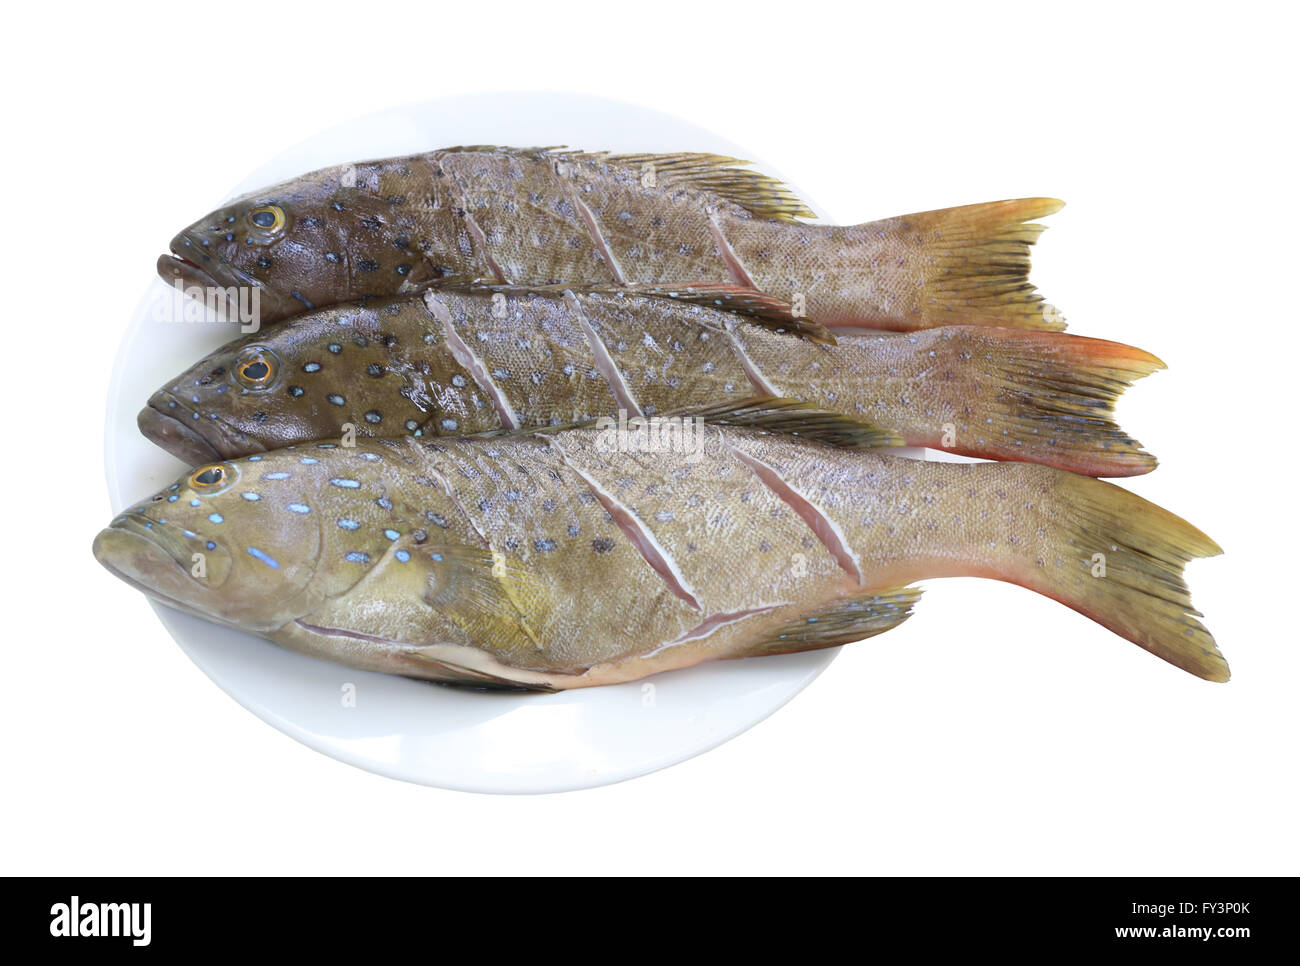 Fresh grouper fish (Leopard grouper) on dish for the ingredient in cooking and have clipping paths. Stock Photo